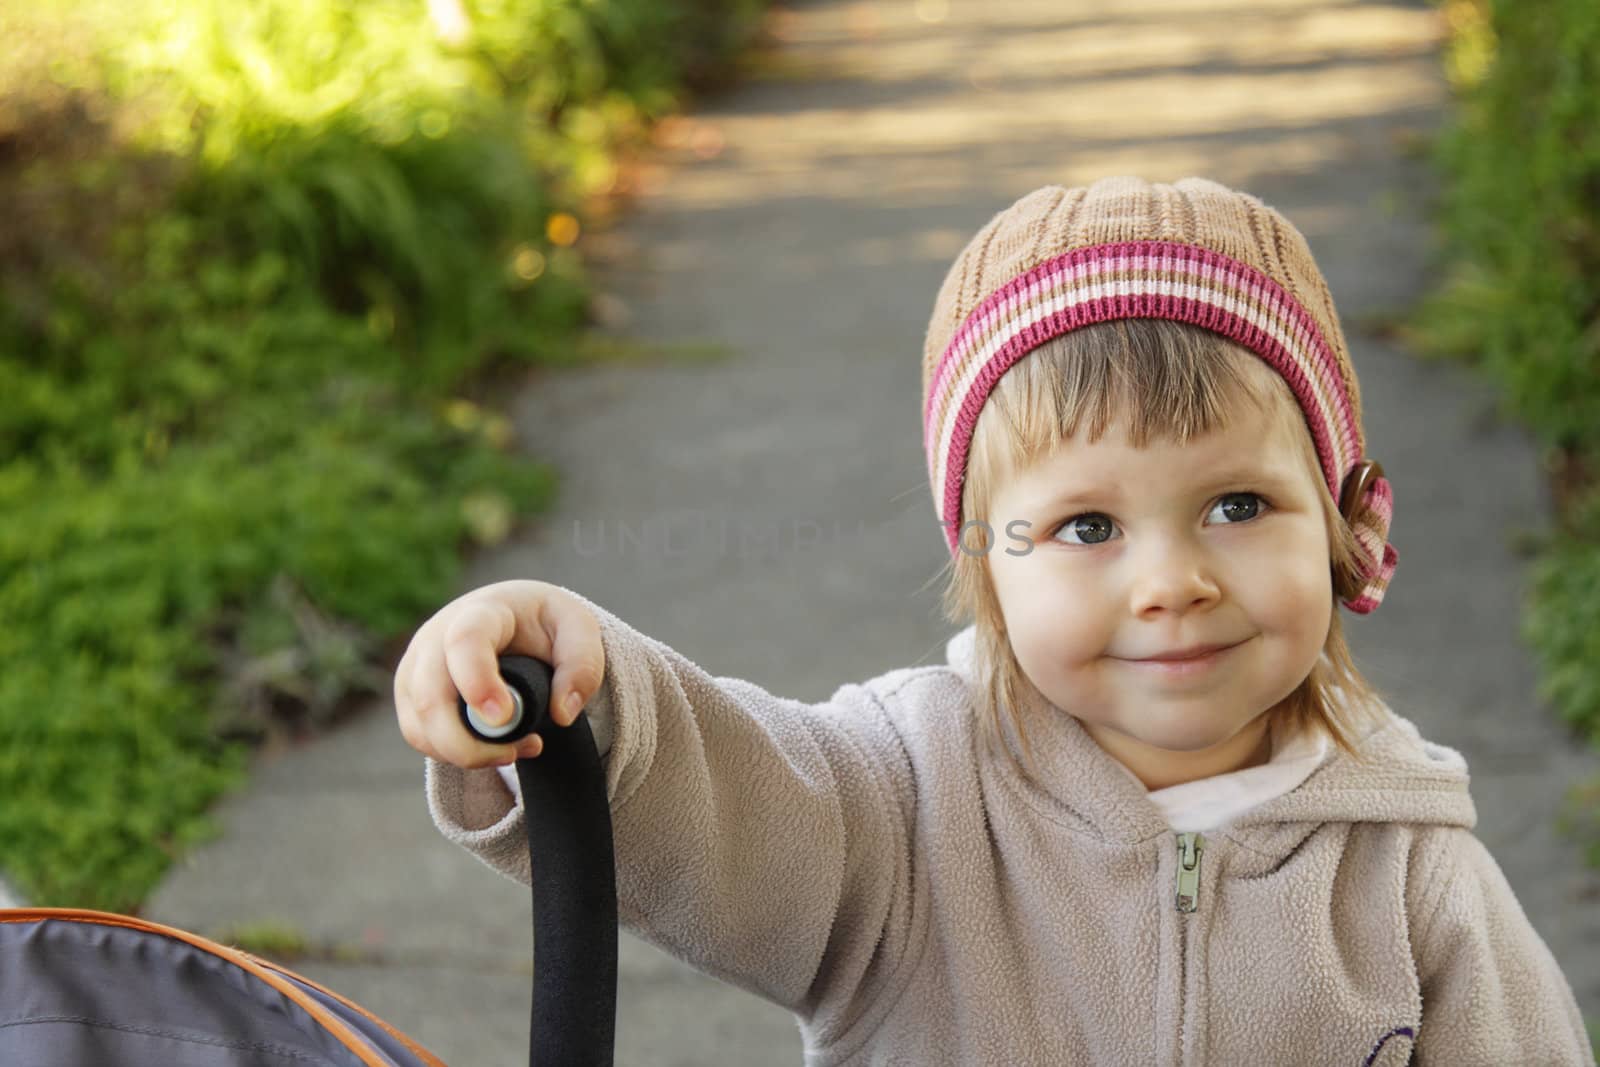 Cute toddler girl with a hat by the stroller outdoors